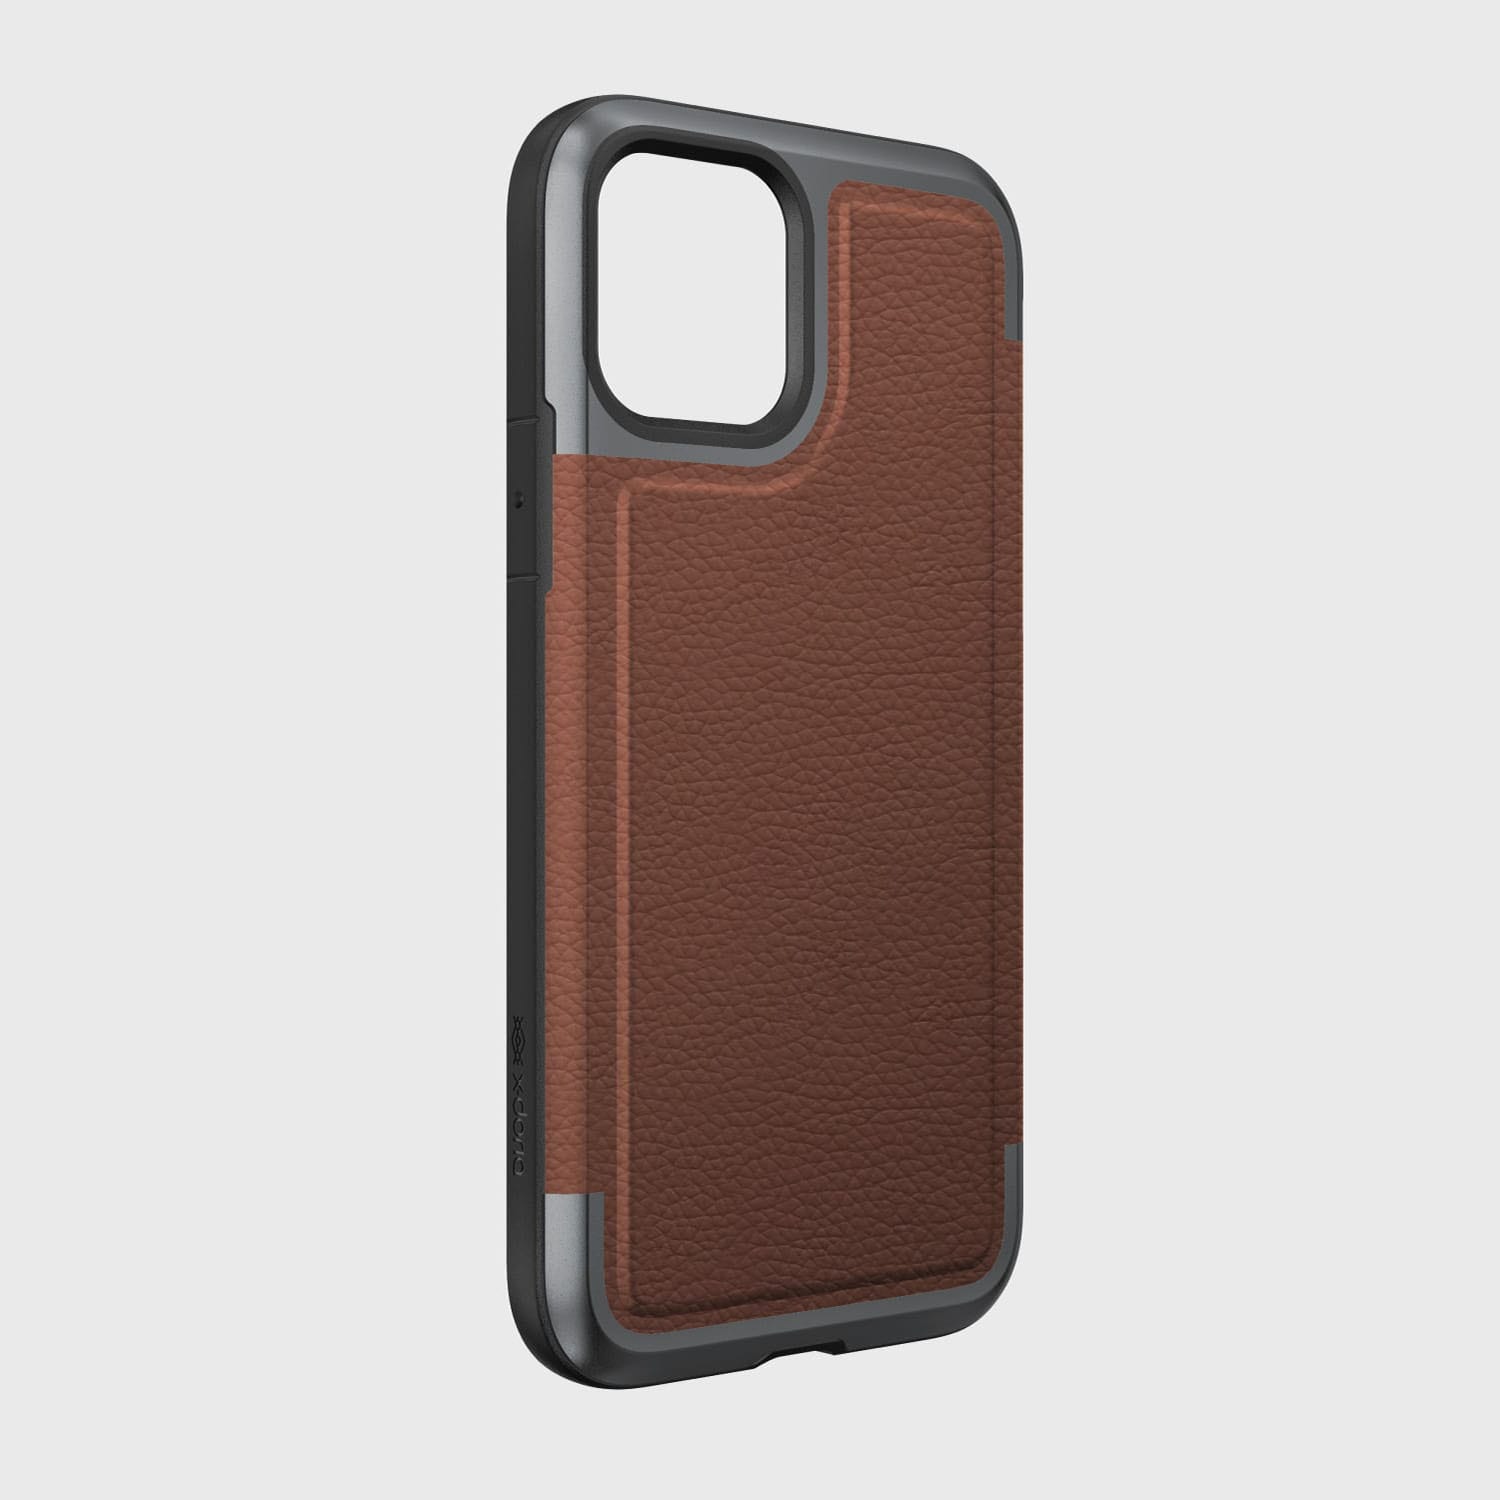 A brown leather protective case for the iPhone 11 pro, providing drop protection - The Raptic PRIME iPhone 11 Case, a brown leather protective case for the iPhone 11 pro, providing drop protection.